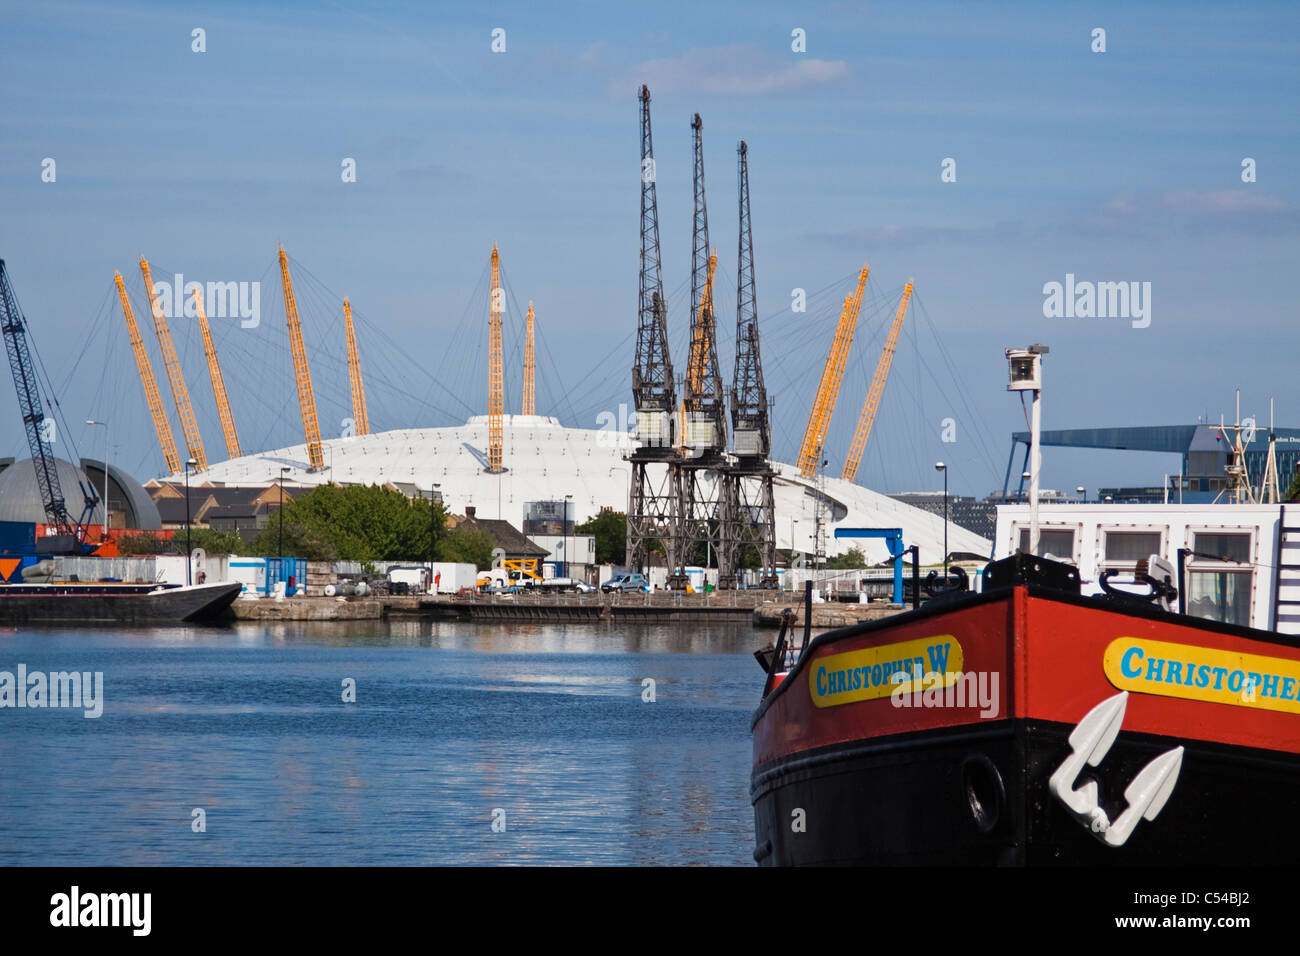 The O2 Arena formerly the Millennium dome Stock Photo